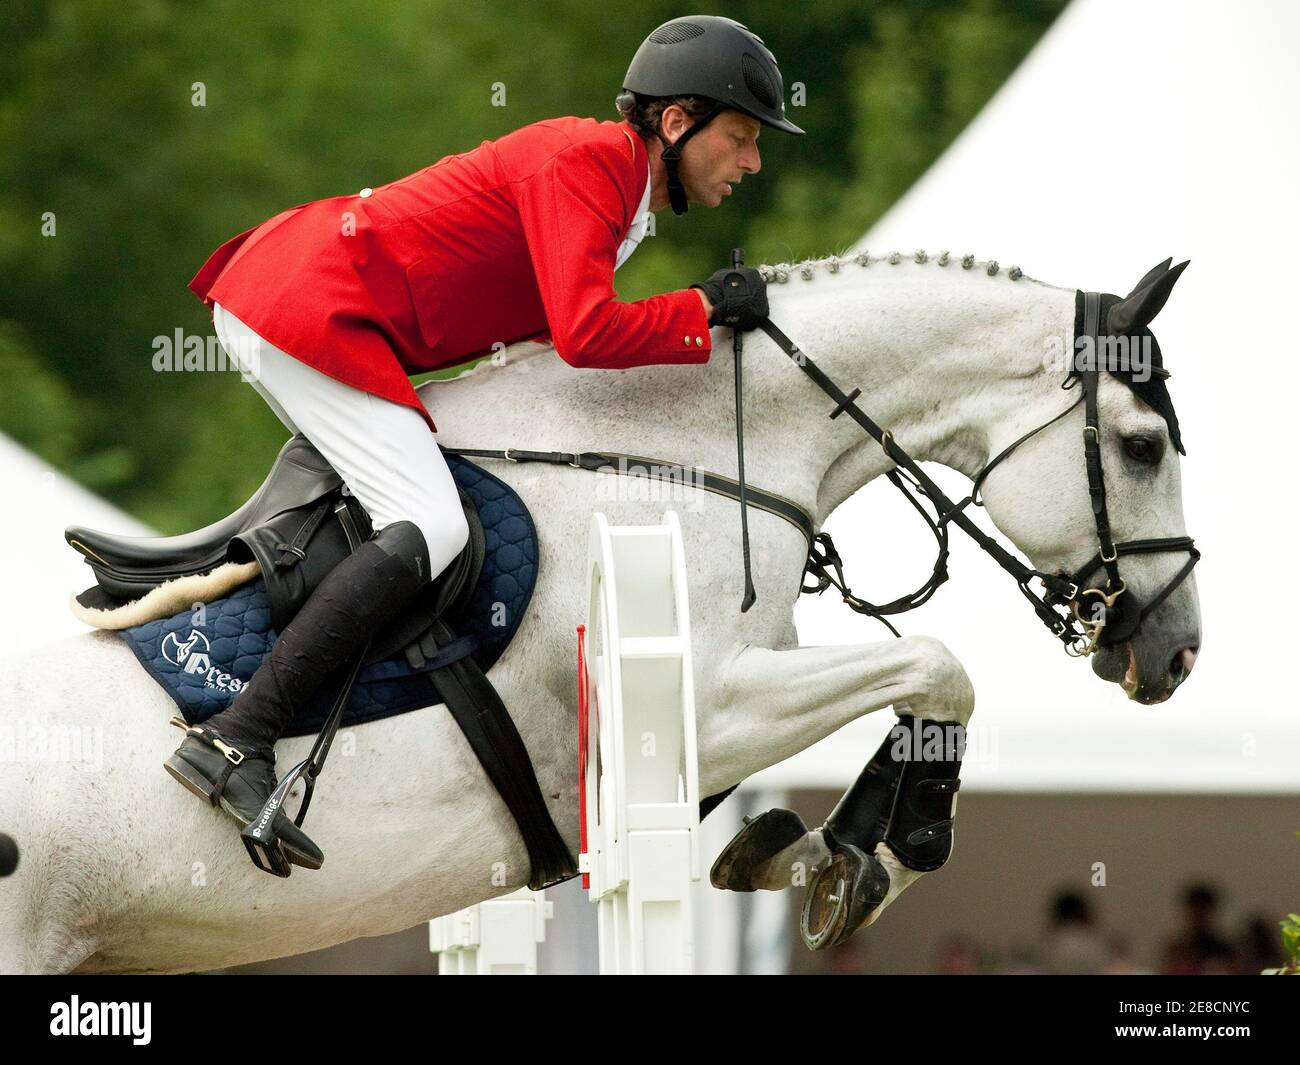 Carsten-Otto Nagel of Germany riding his horse Corradina clears a jump  during the CSIO Grand Prix of Switzerland in St. Gallen June 6, 2010.  REUTERS/Miro Kuzmanovic (SWITZERLAND - Tags: SPORT EQUESTRIANISM Stock